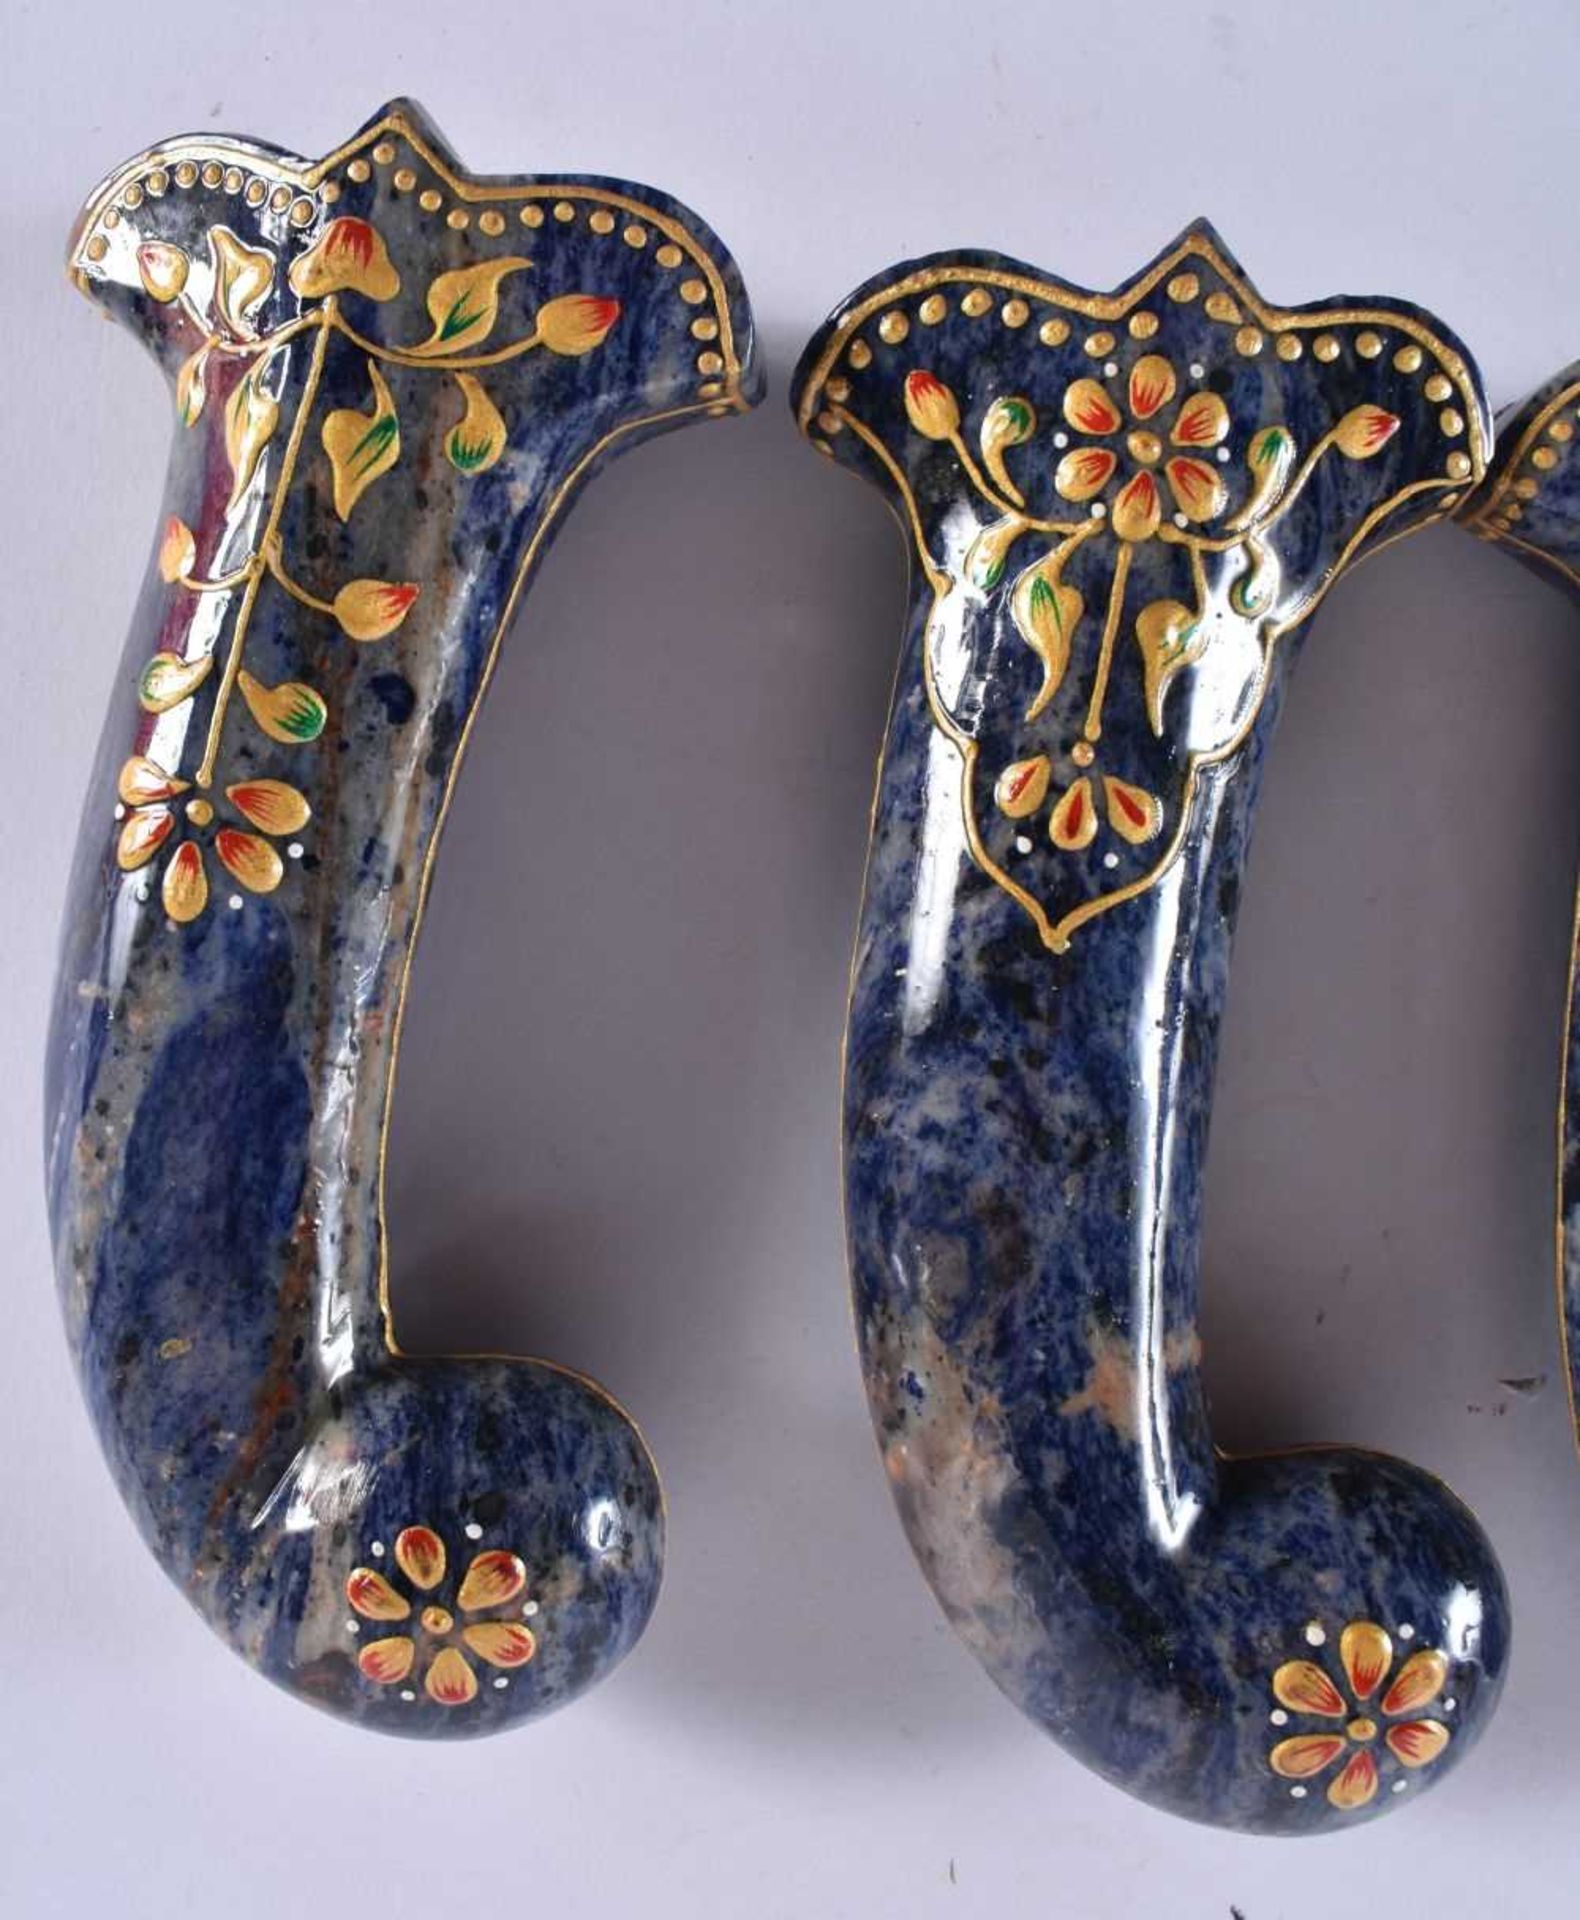 A SET OF FIVE MIDDLE EASTERN QAJAR LACQUER HARDSTONE DAGGER HANDLES overlaid with foliage and vines. - Image 4 of 6